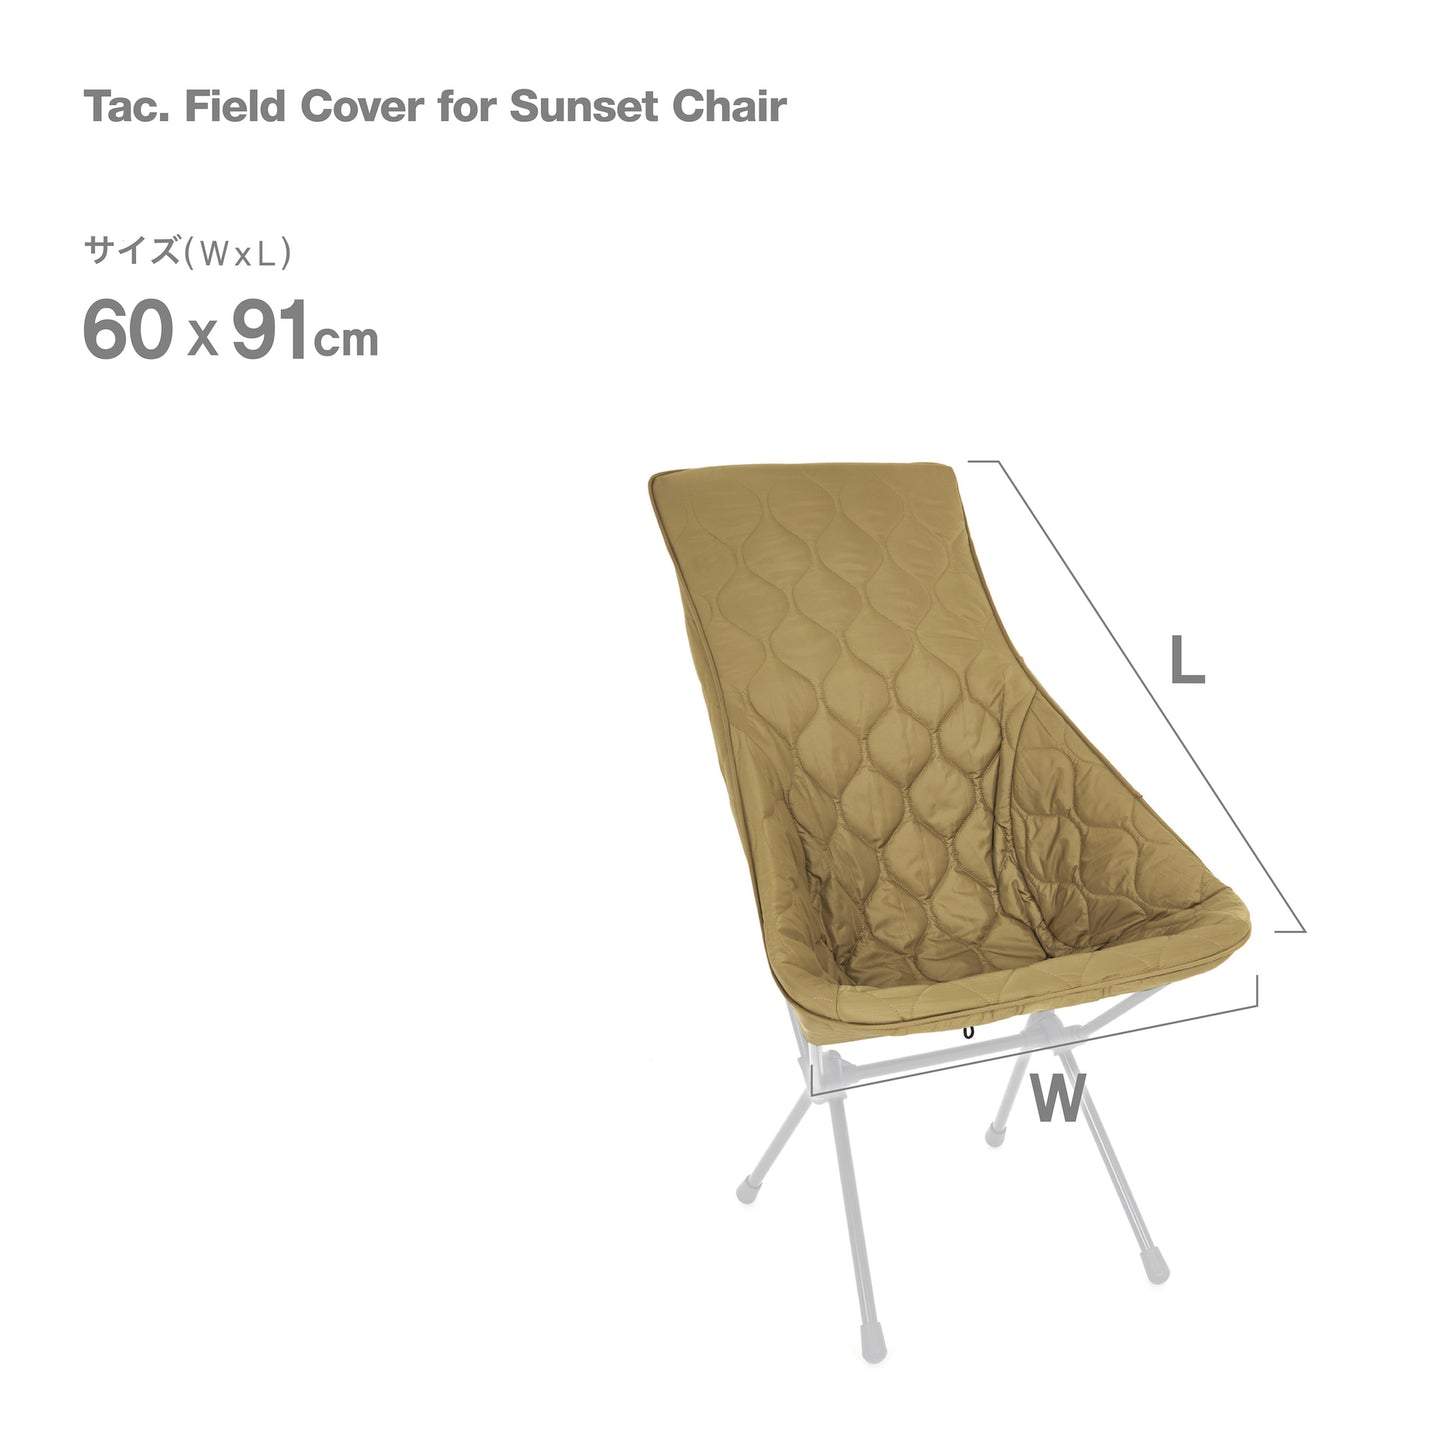 Tac. Field Cover for Sunset Chair - Coyote Tan / Military Olive